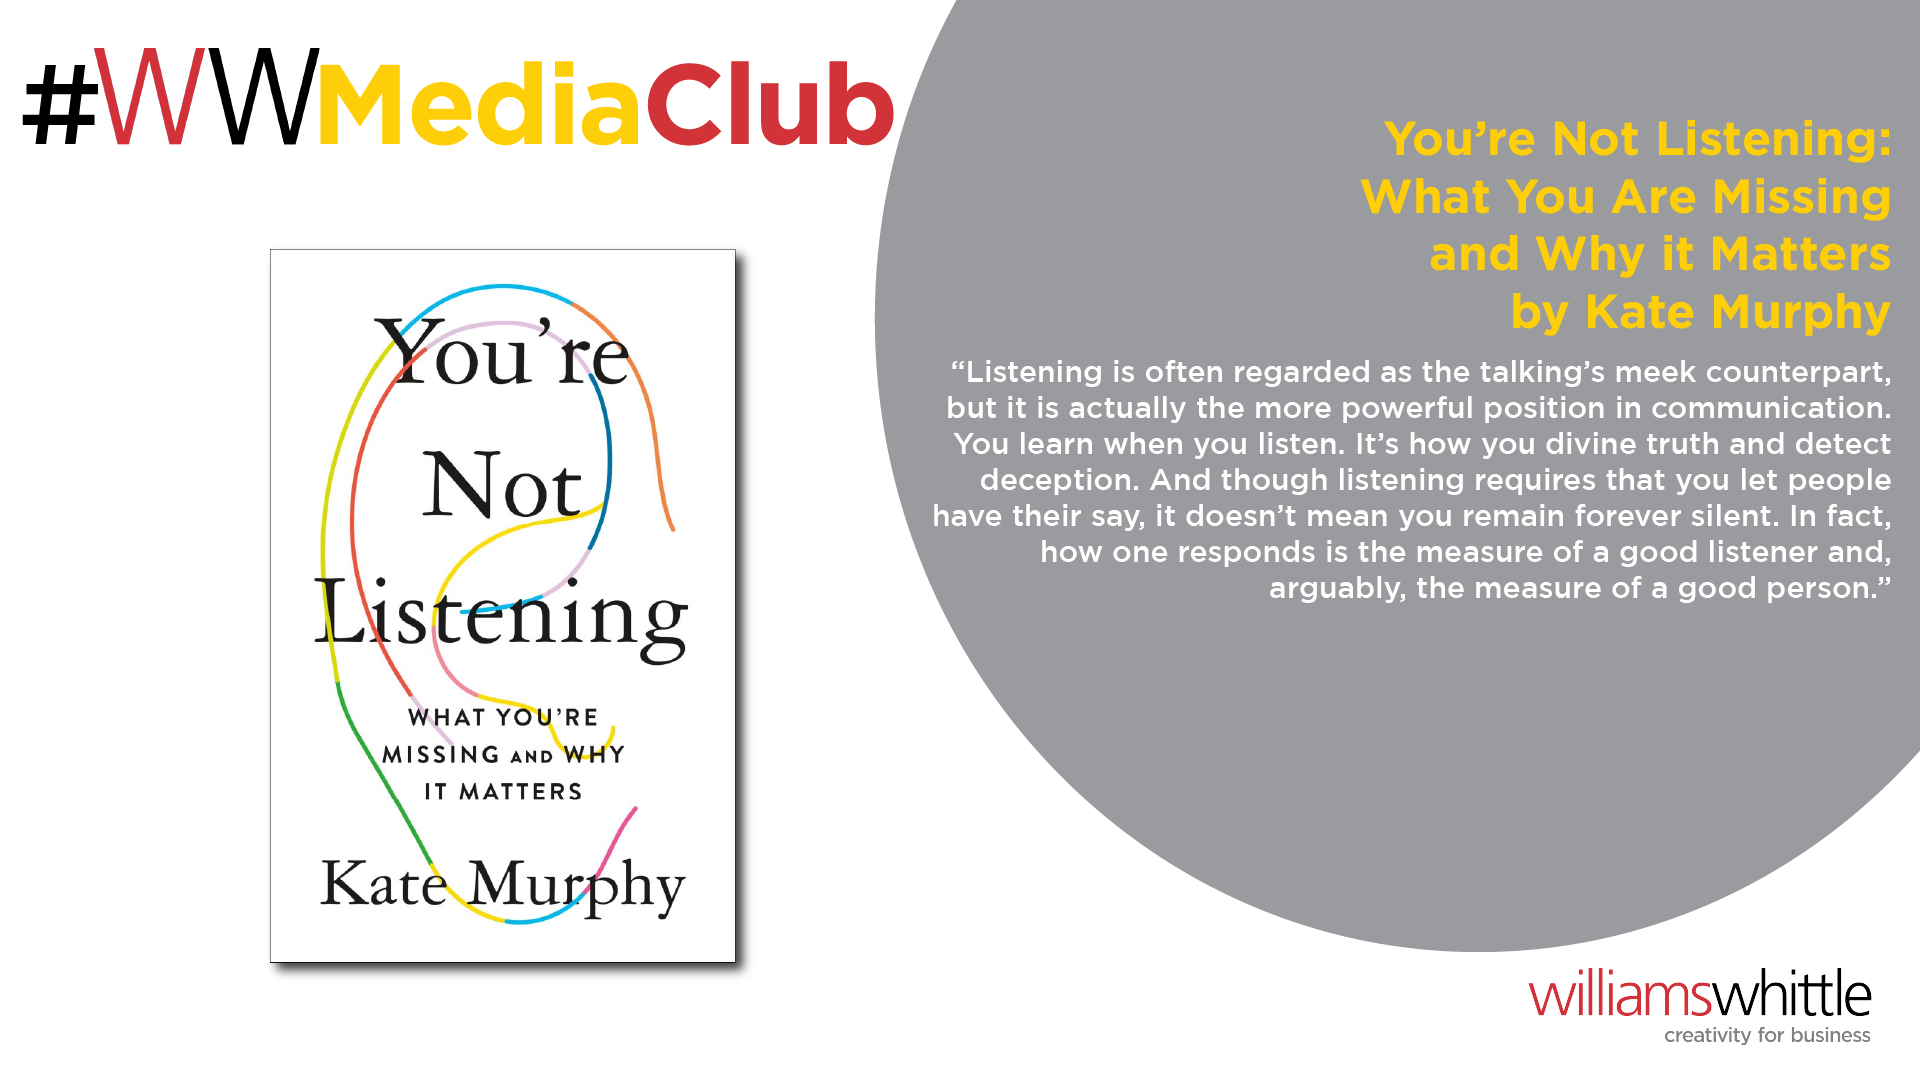 You’re Not Listening: What You’re Missing and Why it Matters